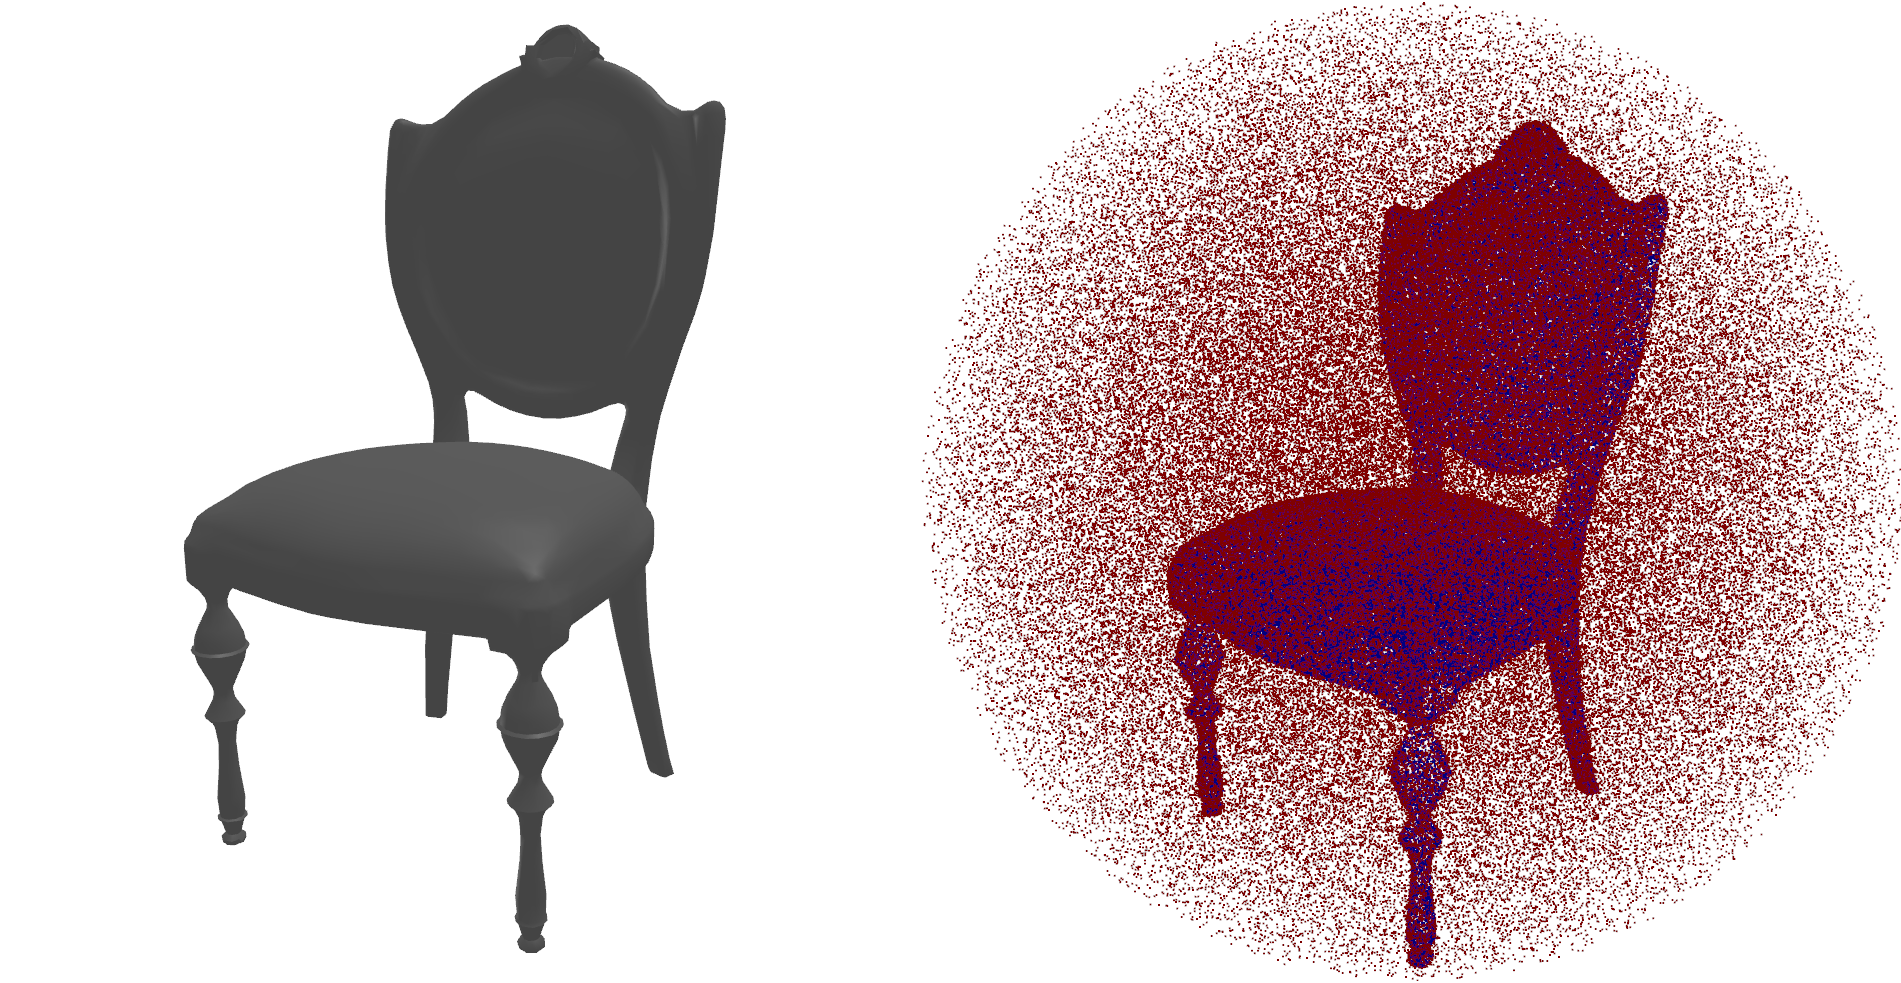 Example of a mesh and a point cloud of non-uniformly sampled SDF points